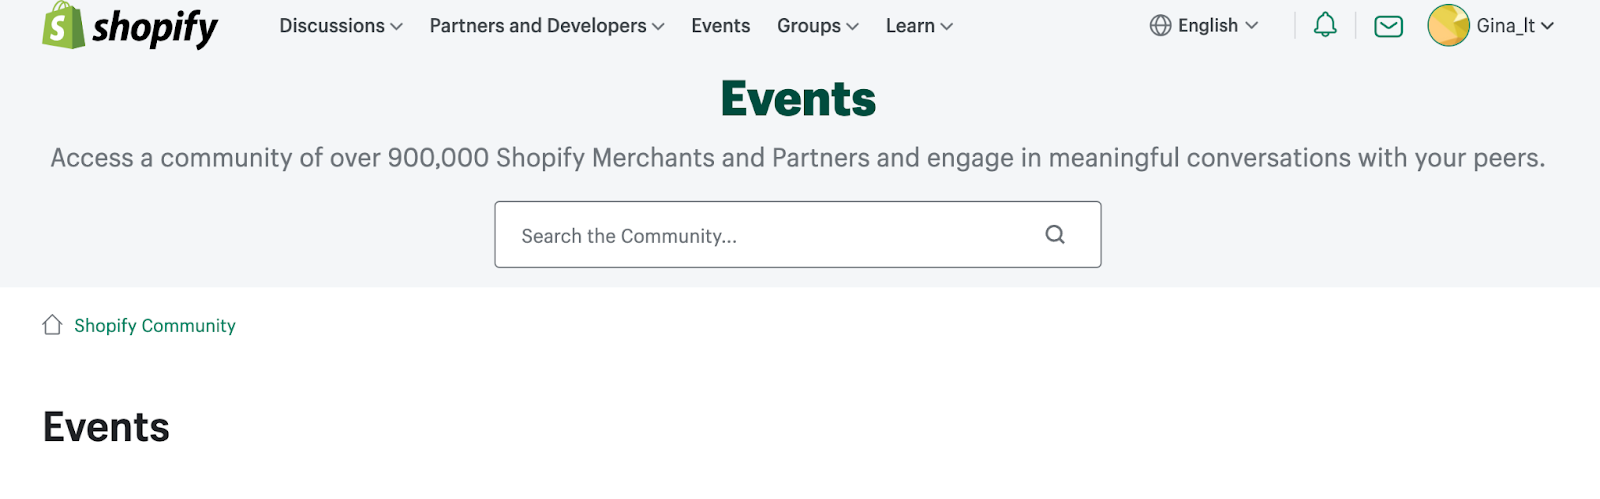 shopify events